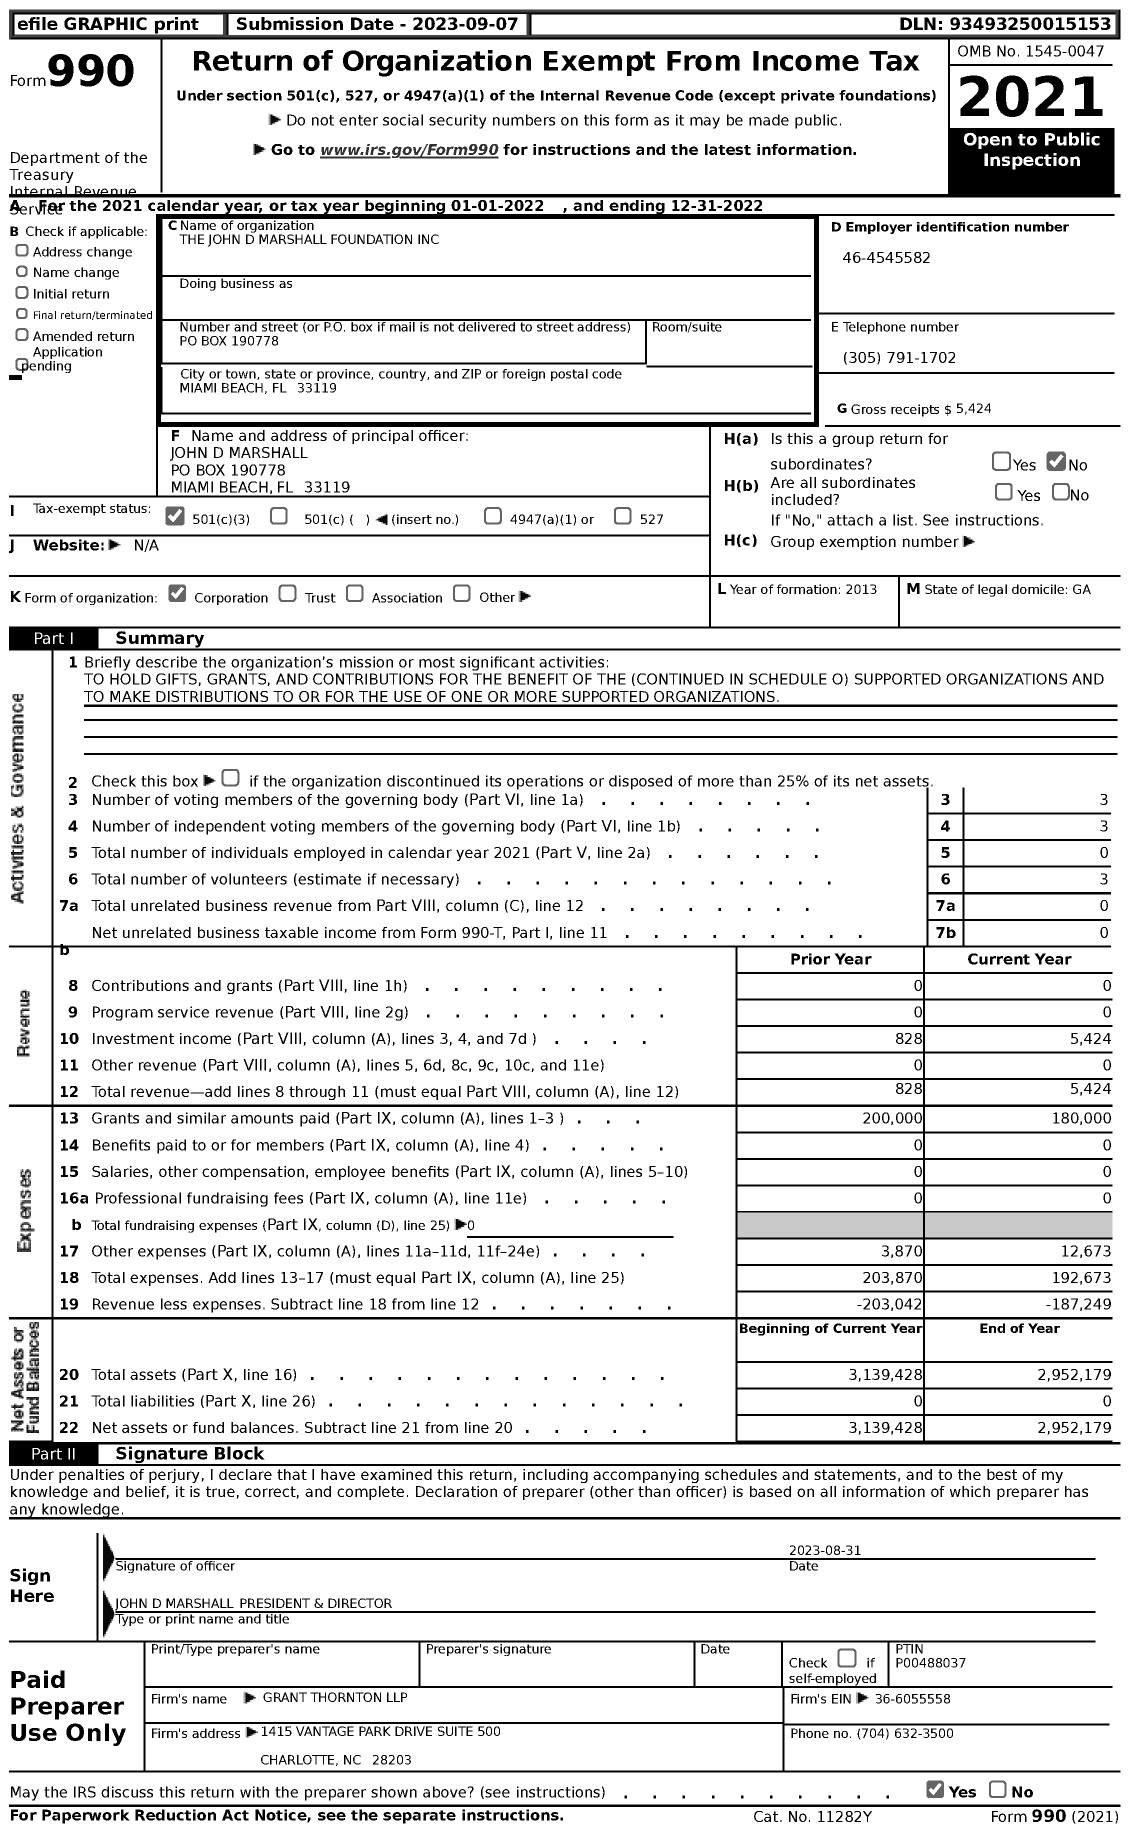 Image of first page of 2022 Form 990 for The John D Marshall Foundation